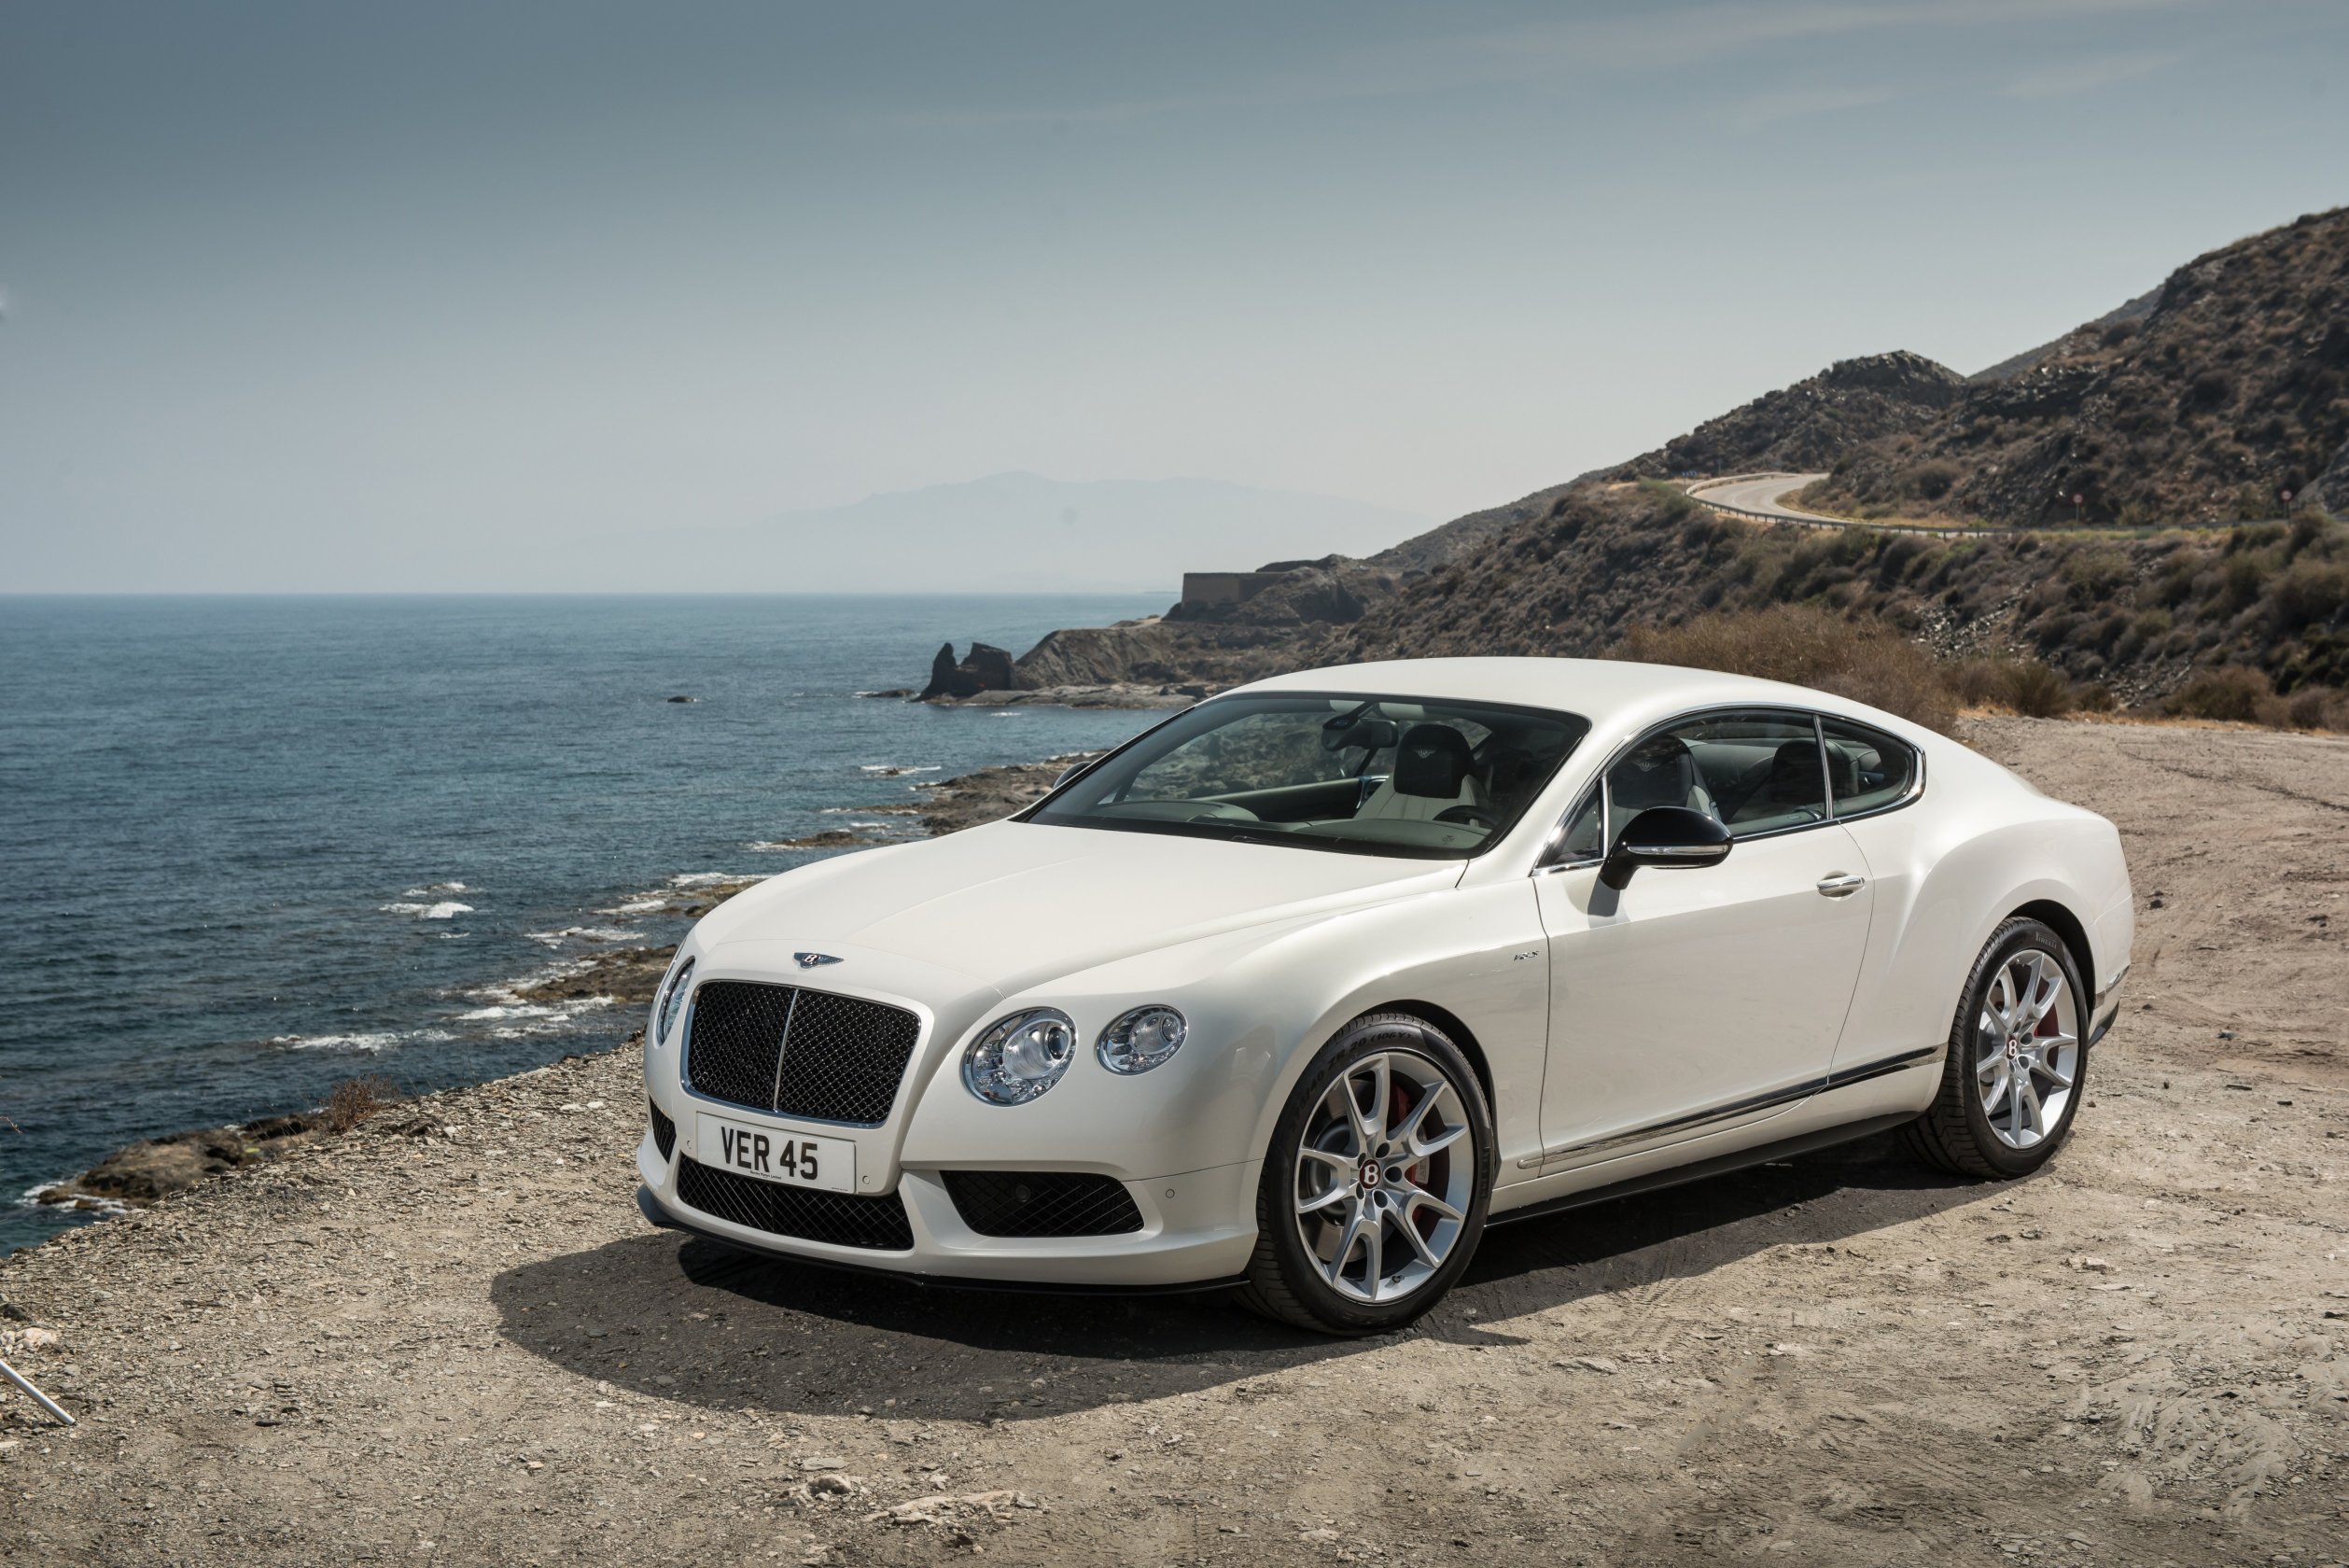 Bentley Continental Gt Wallpapers Vehicles Hq Bentley Continental Gt Pictures 4k Wallpapers 2019